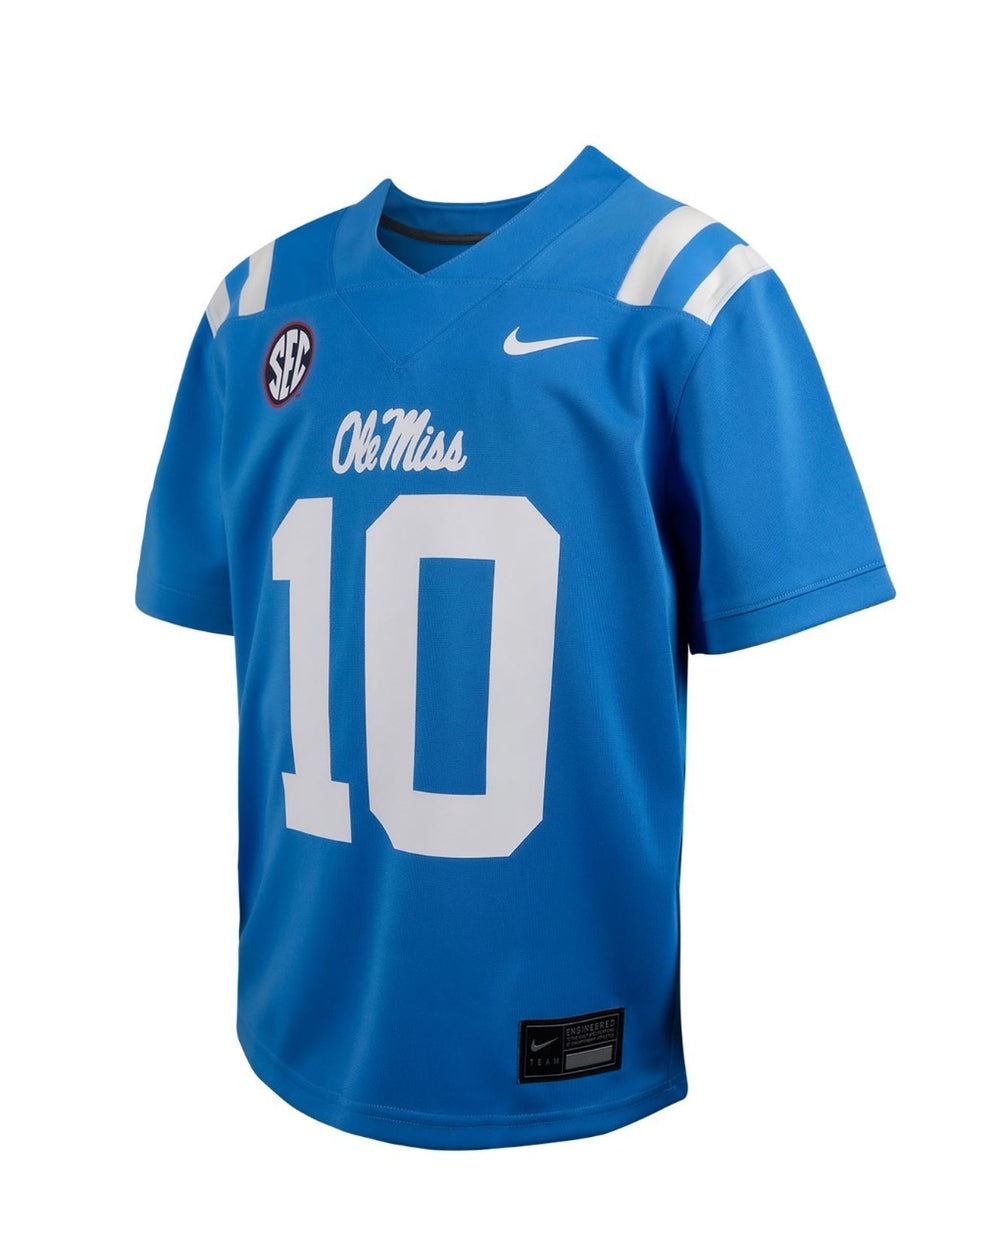 Ole Miss Adult Replica Italy Blue Football Jersey